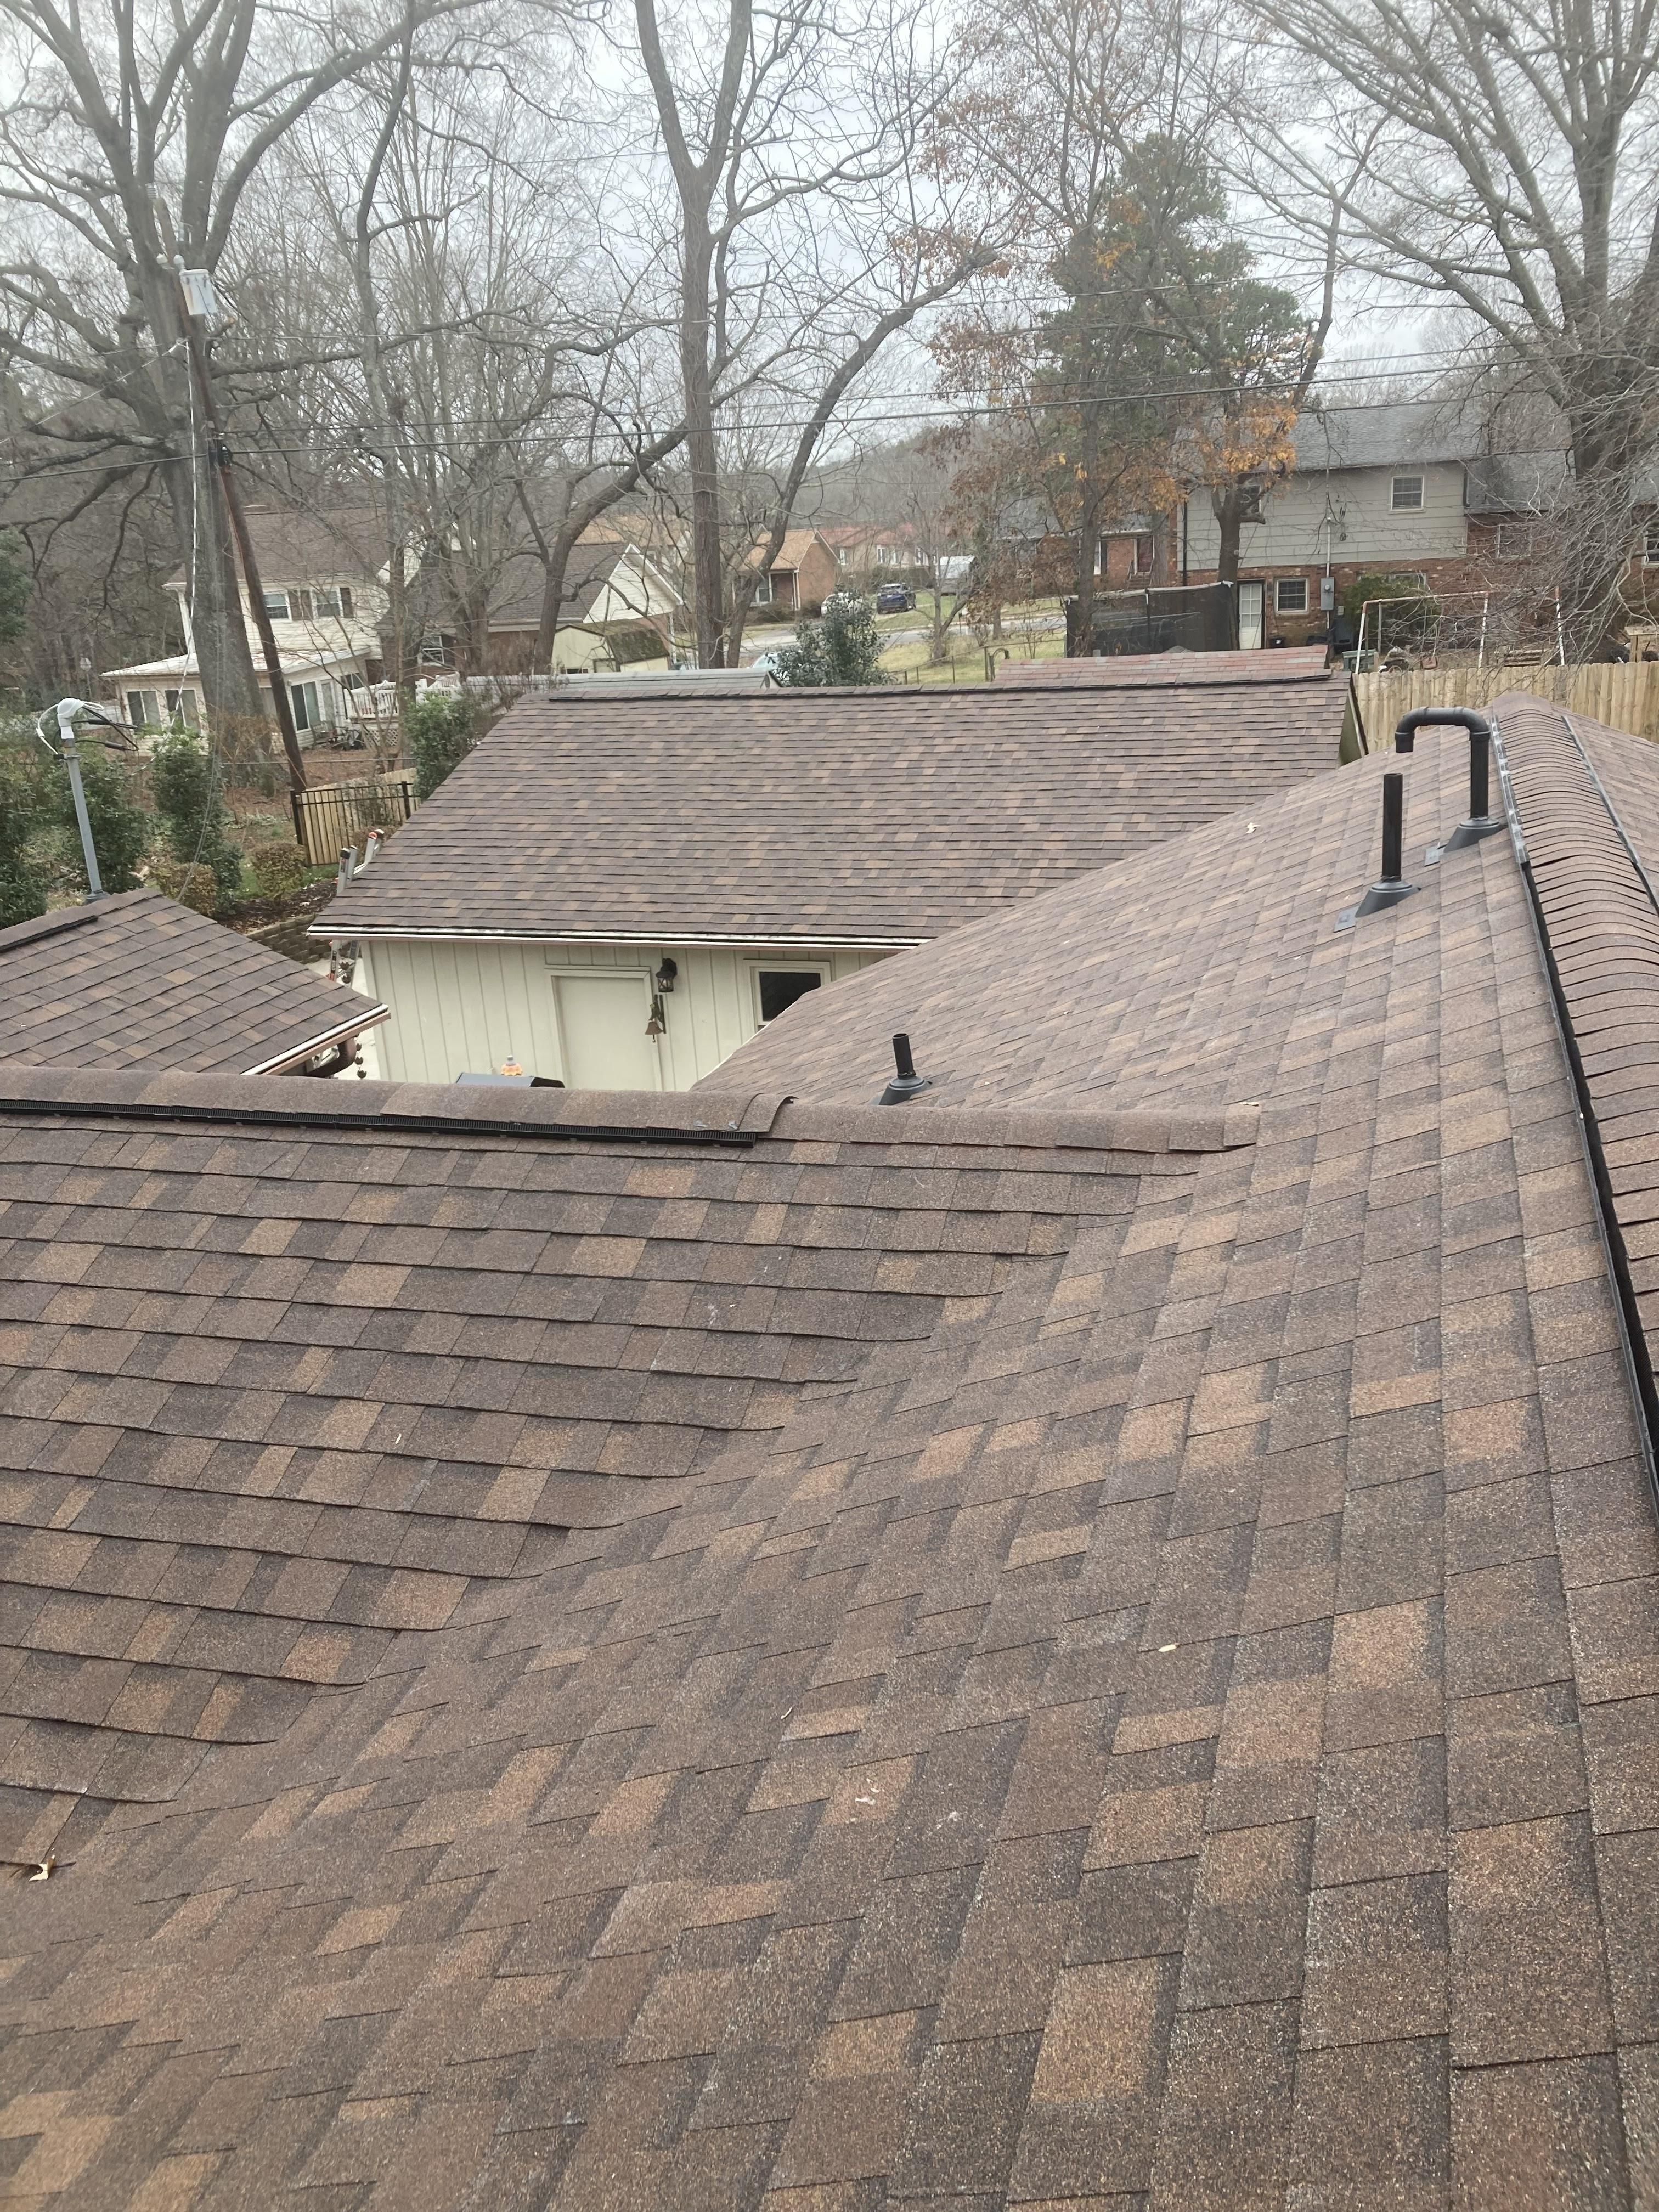 All Photos for Kingdom Roofing Services in Charlotte, NC